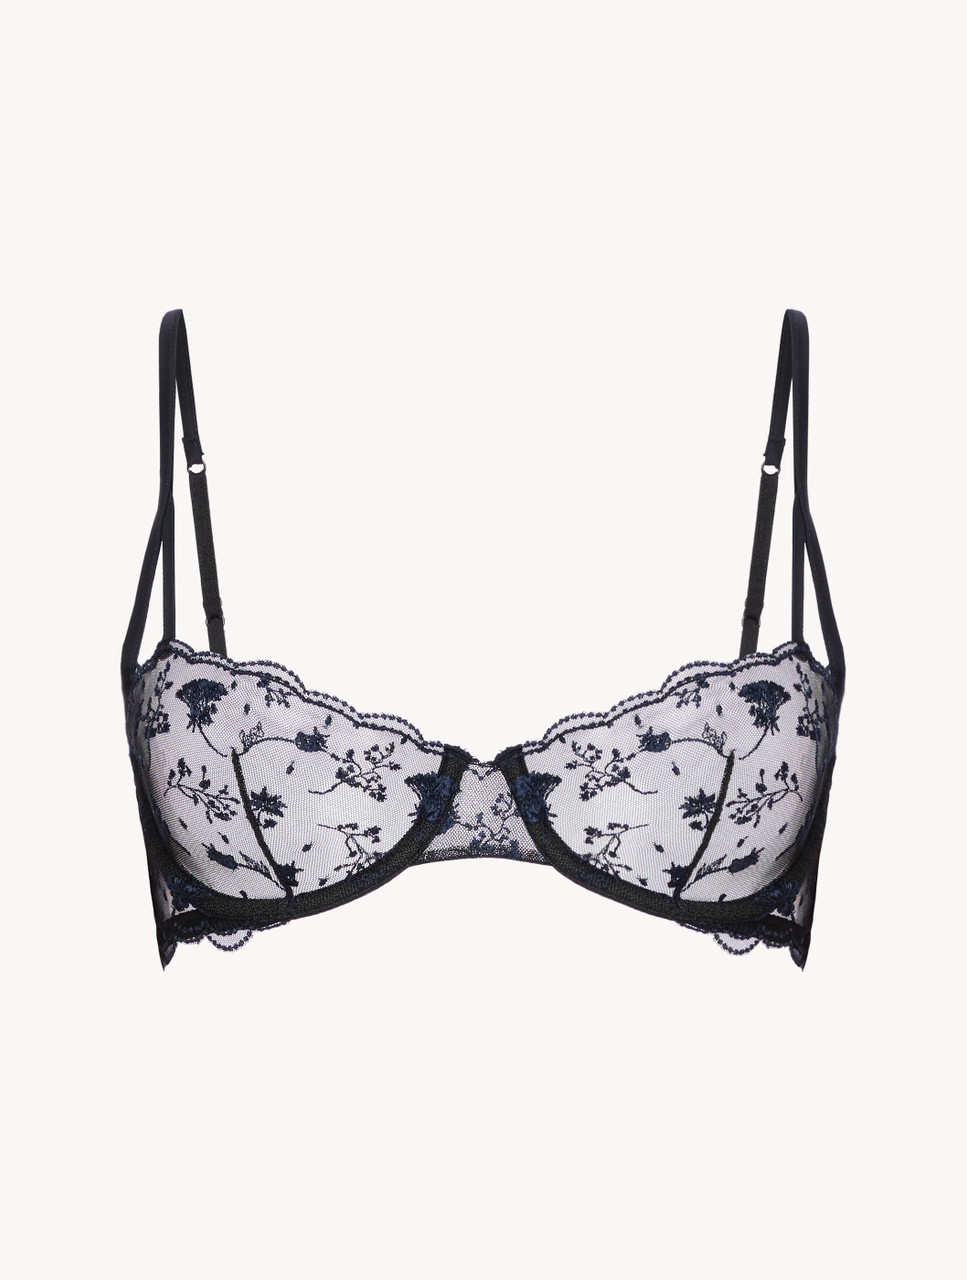 Balconette Bras Size 38B, Free Delivery*